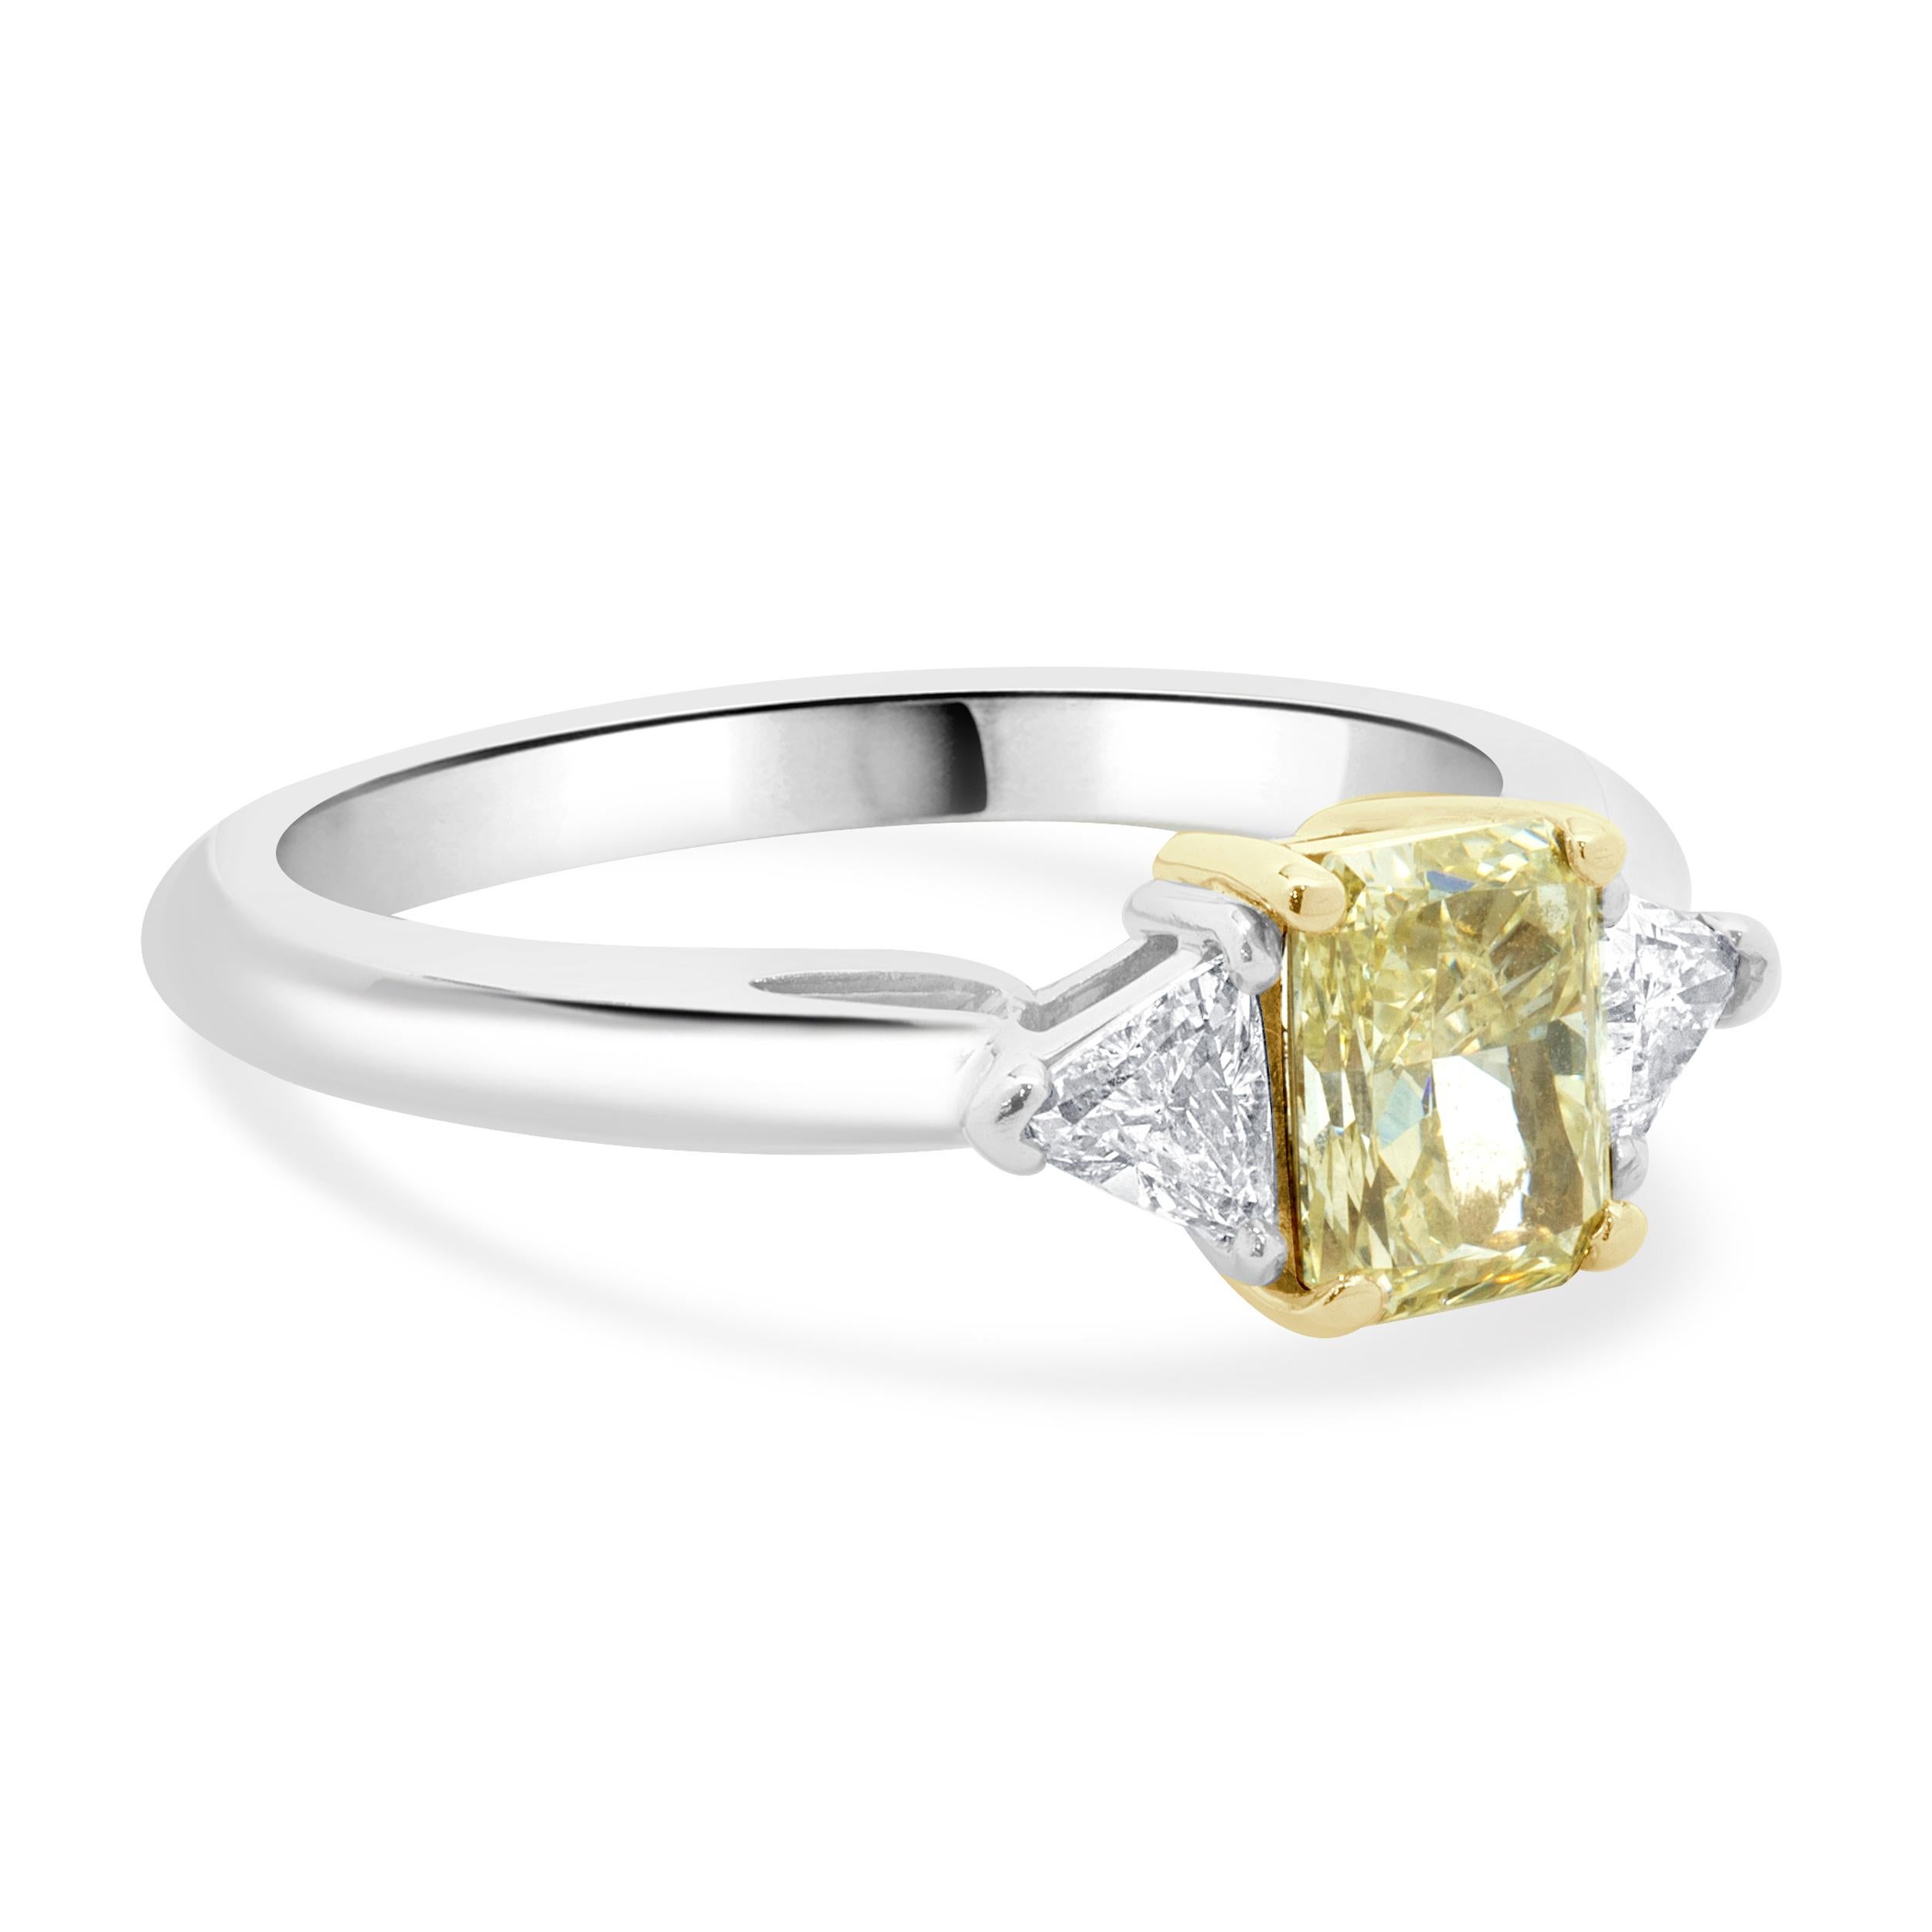 Designer: custom
Material: platinum & 18K yellow gold
Diamond: 1 radiant cut = 1.00ct
Color: Fancy Light Yellow
Clarity: VS2
Diamond: 2 trillion cut = 0.25cttw
Color: H
Clarity: SI2
Dimensions: ring top measures 7mm wide
Ring Size: 6.5